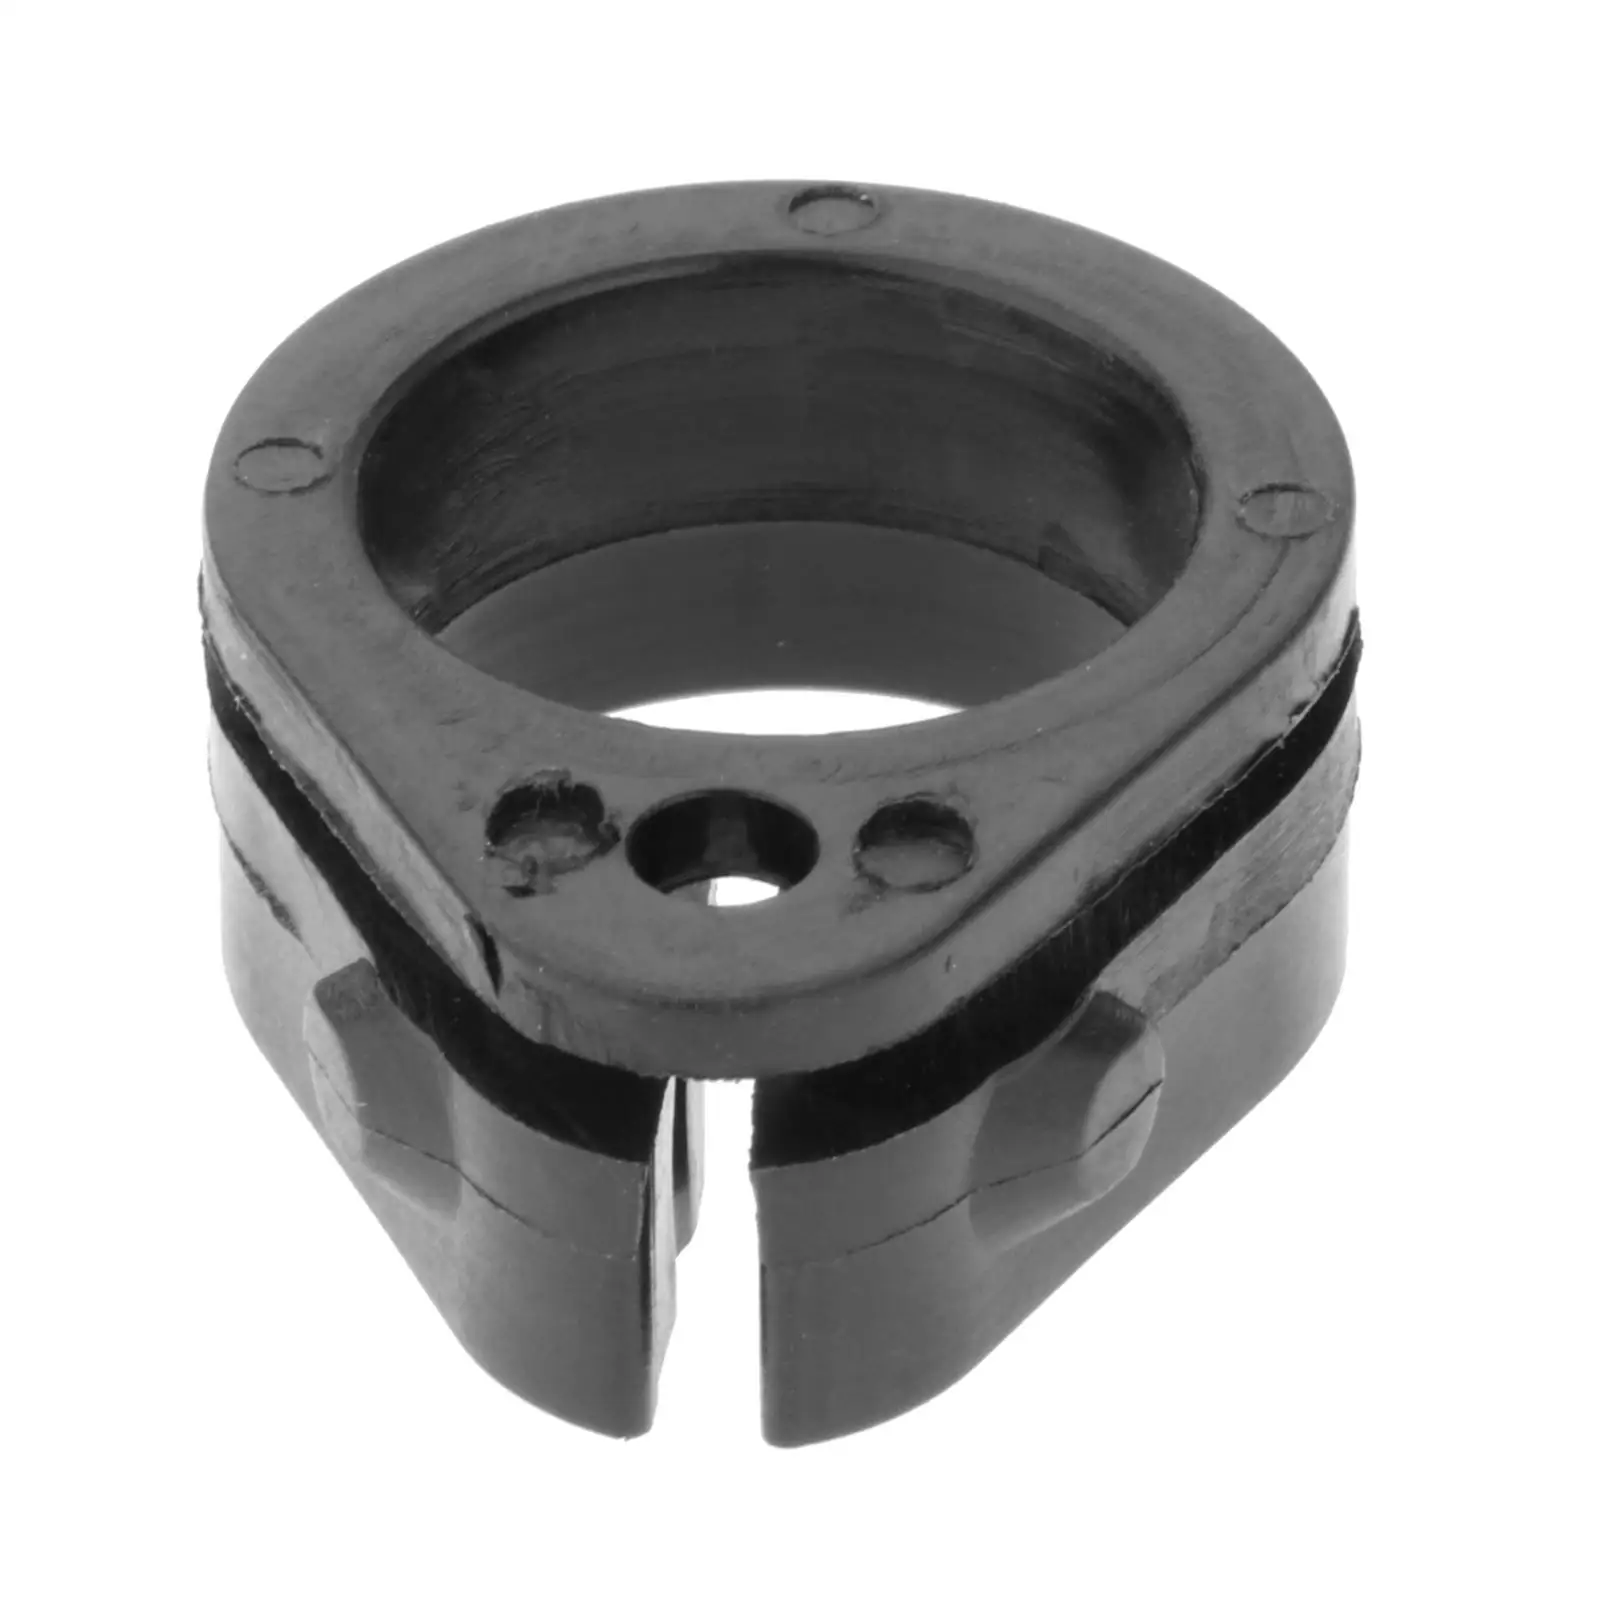 Gearshift Boot Bracket 682-44176-00 for Outboard 9.9HP 15HP Accessories